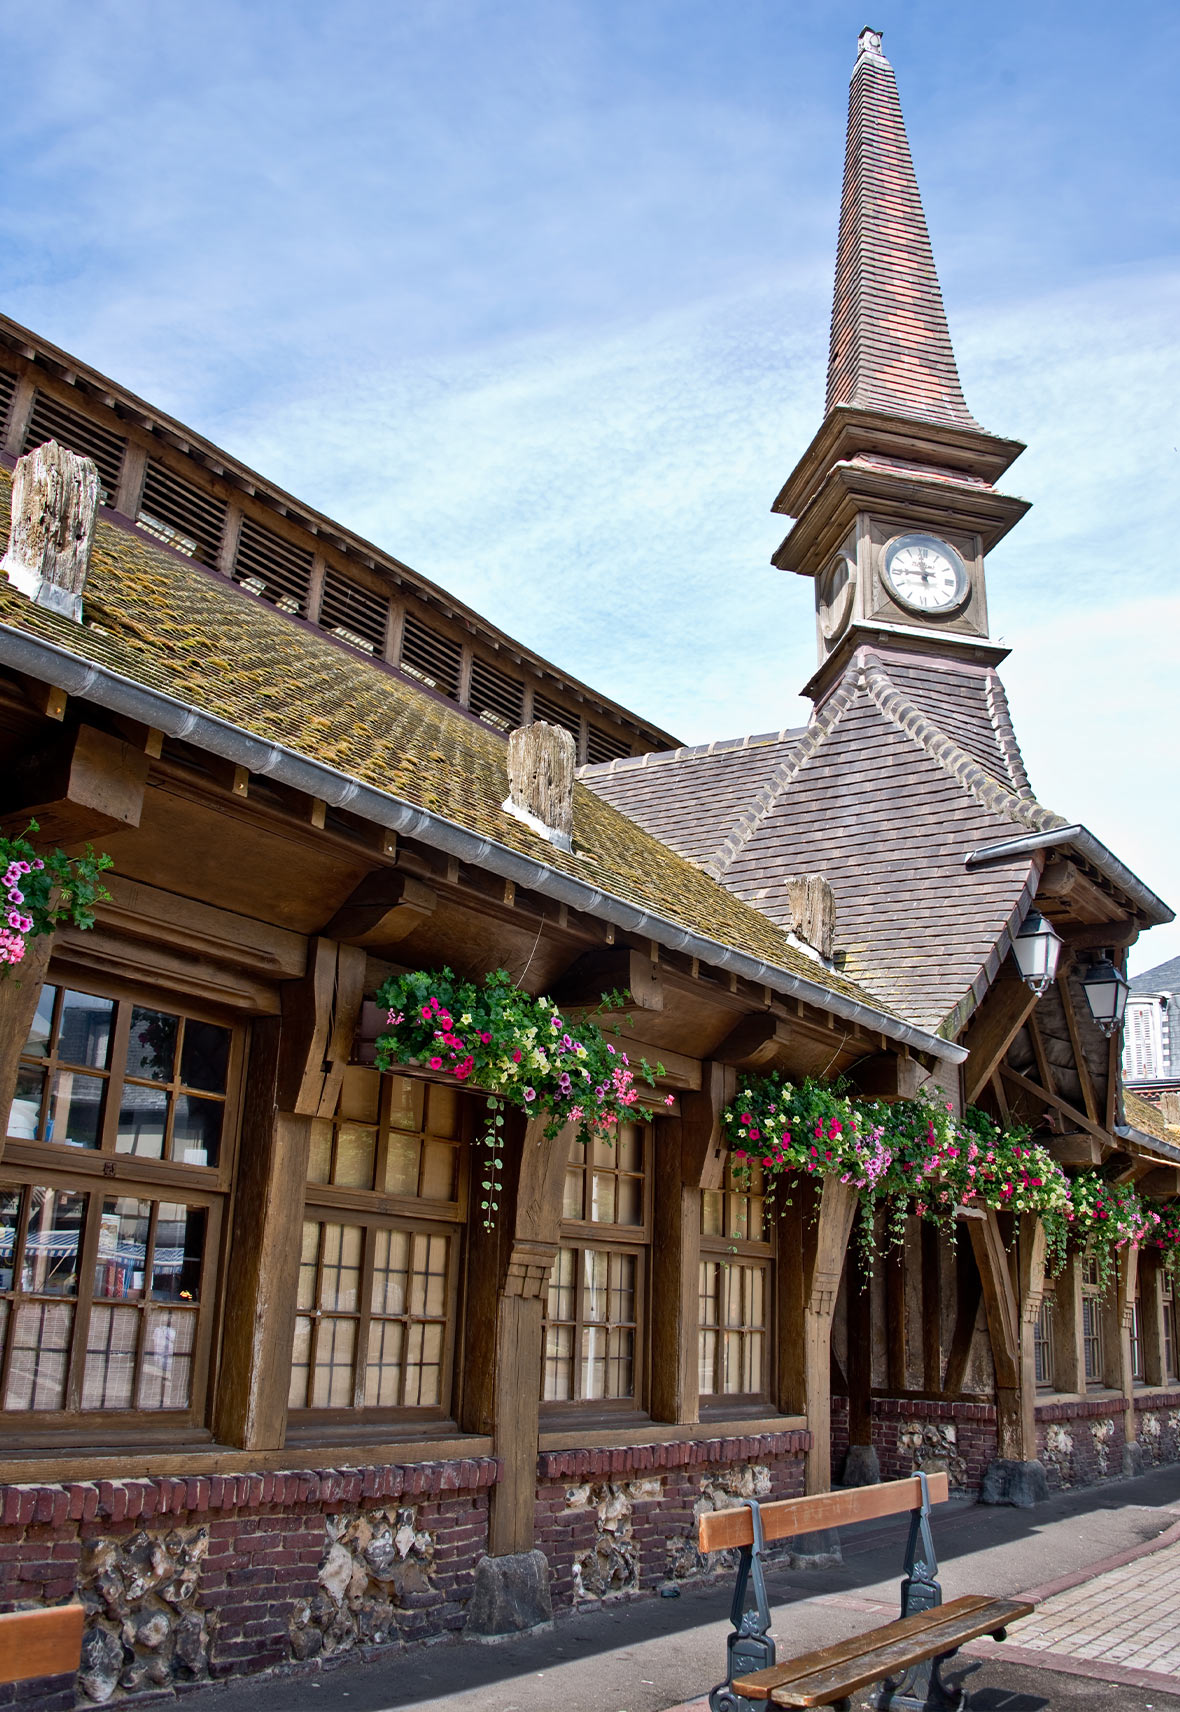 Old covered market building Etretat with clock tower and hanging floral baskets in the windows